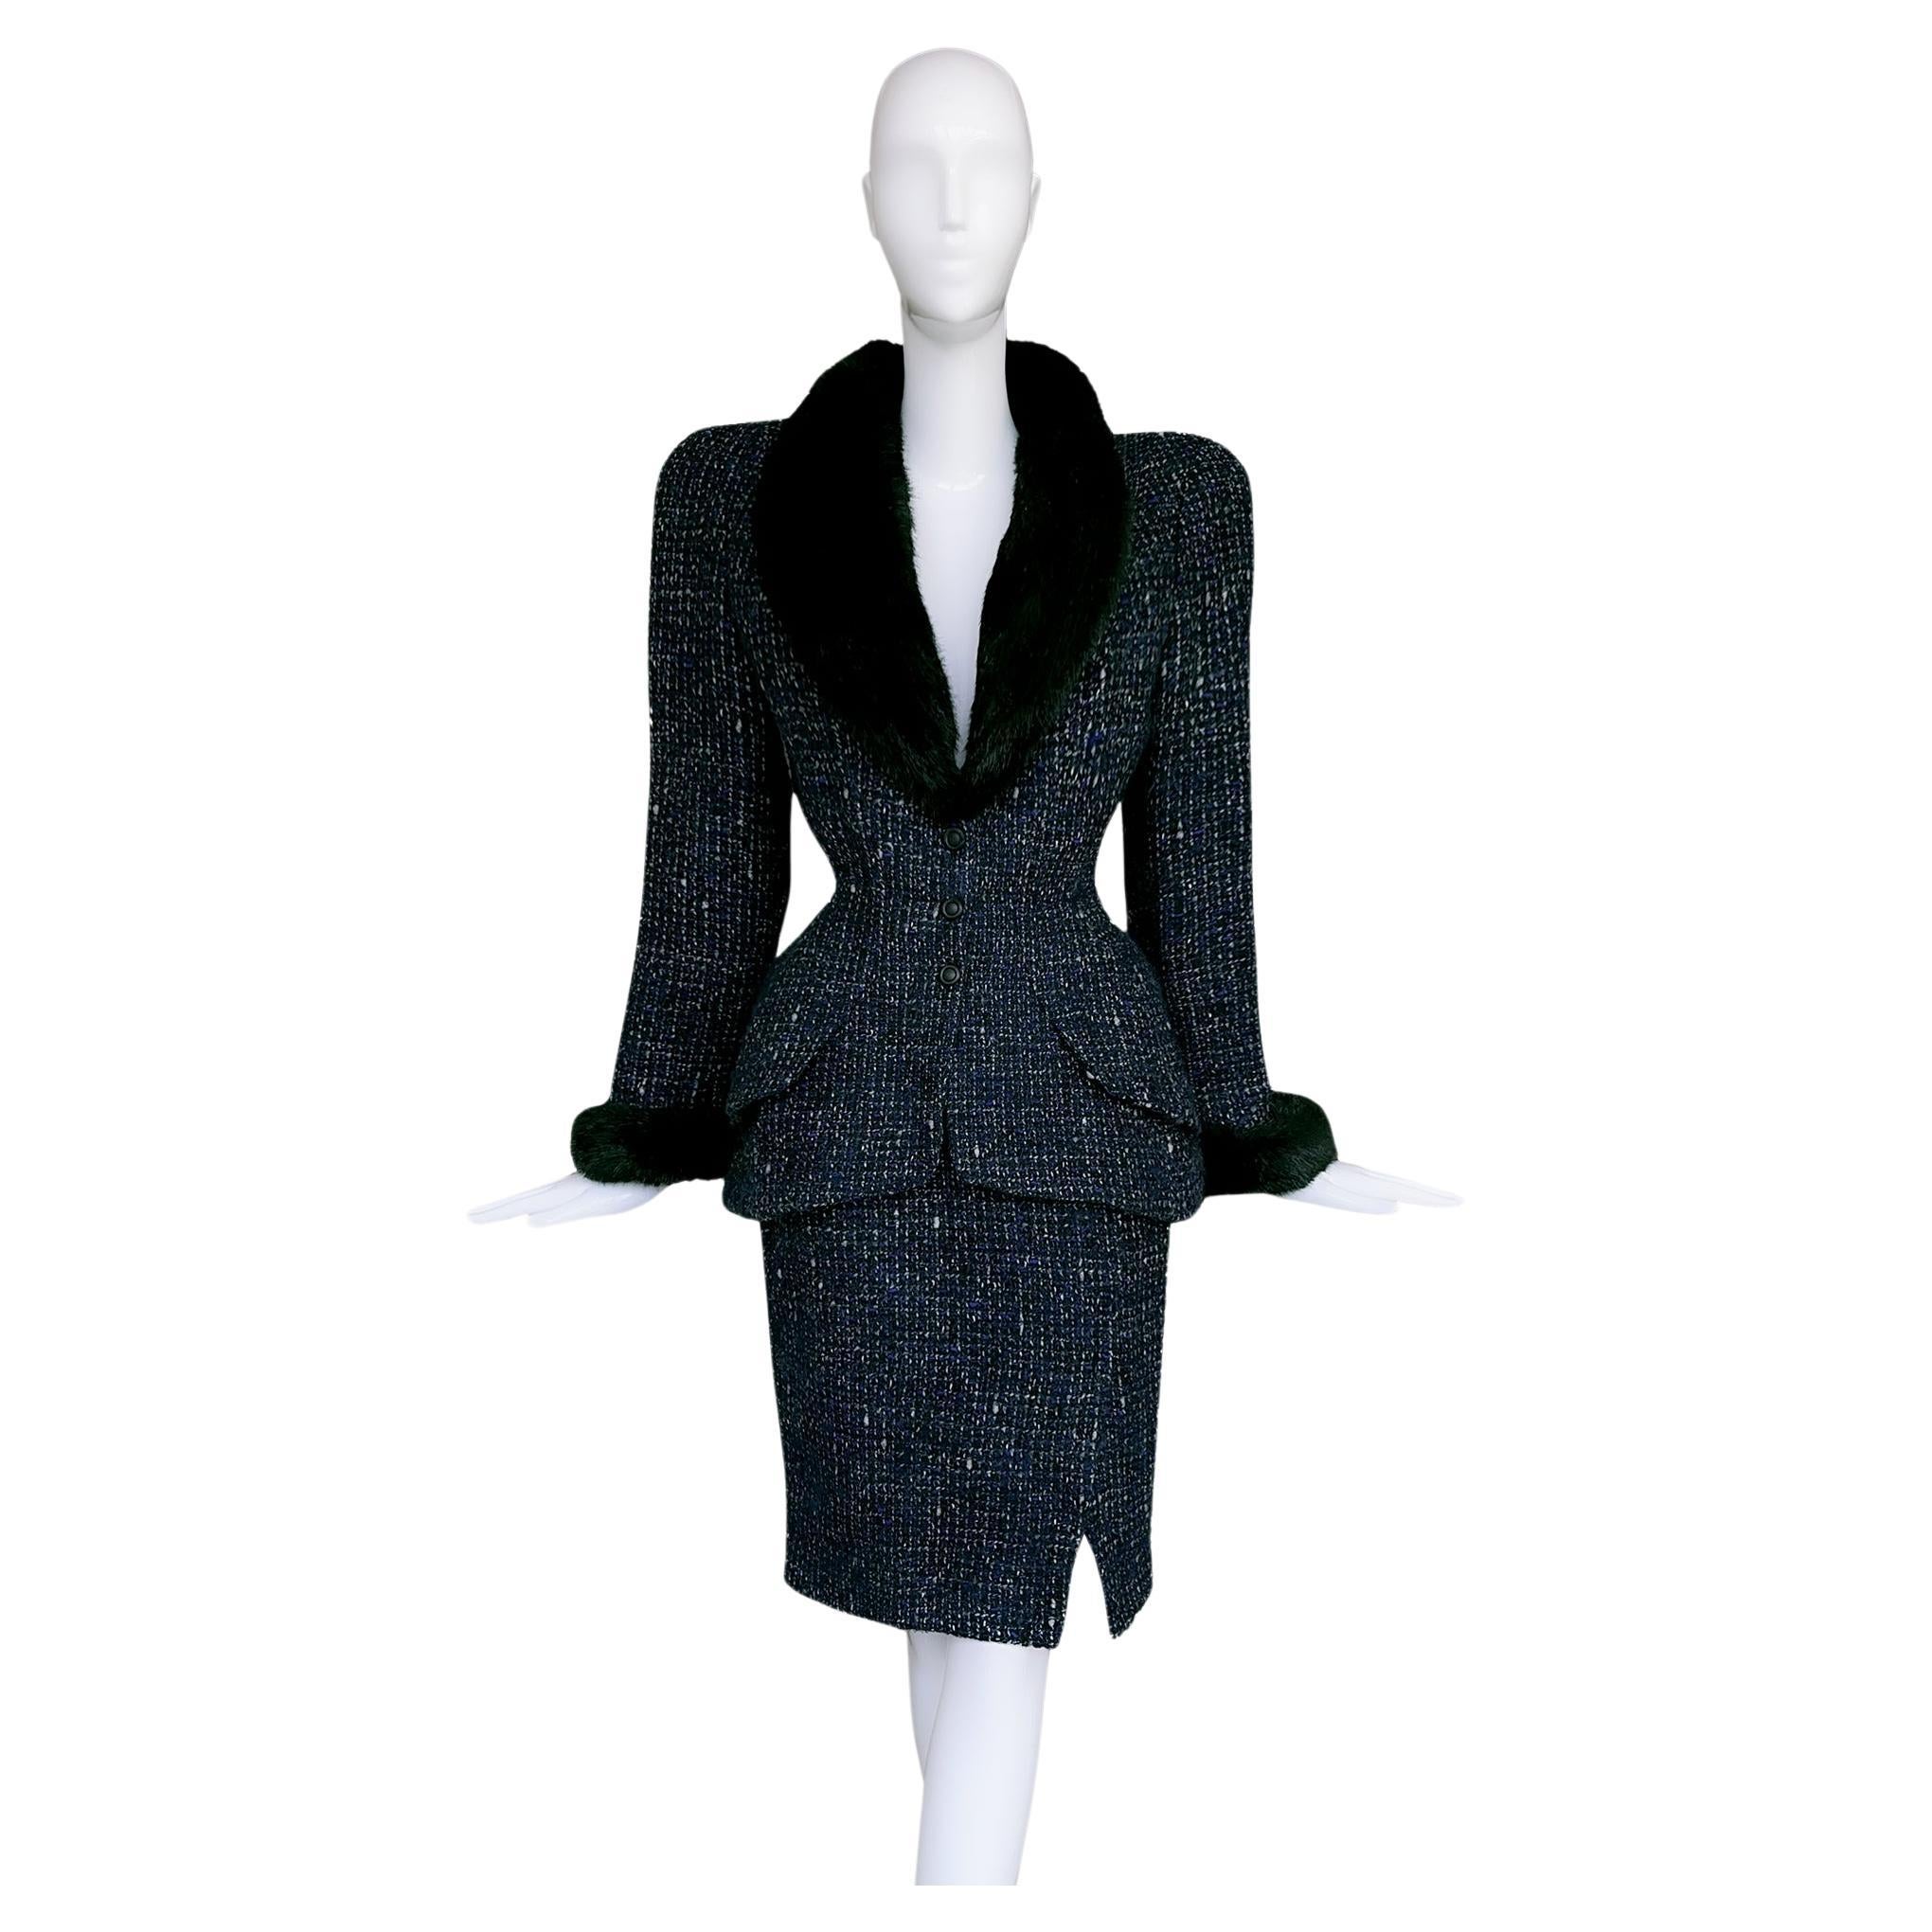 Rare Thierry Mugler FW1998 Archival Skirt Suit Tweed Jacket  For Sale